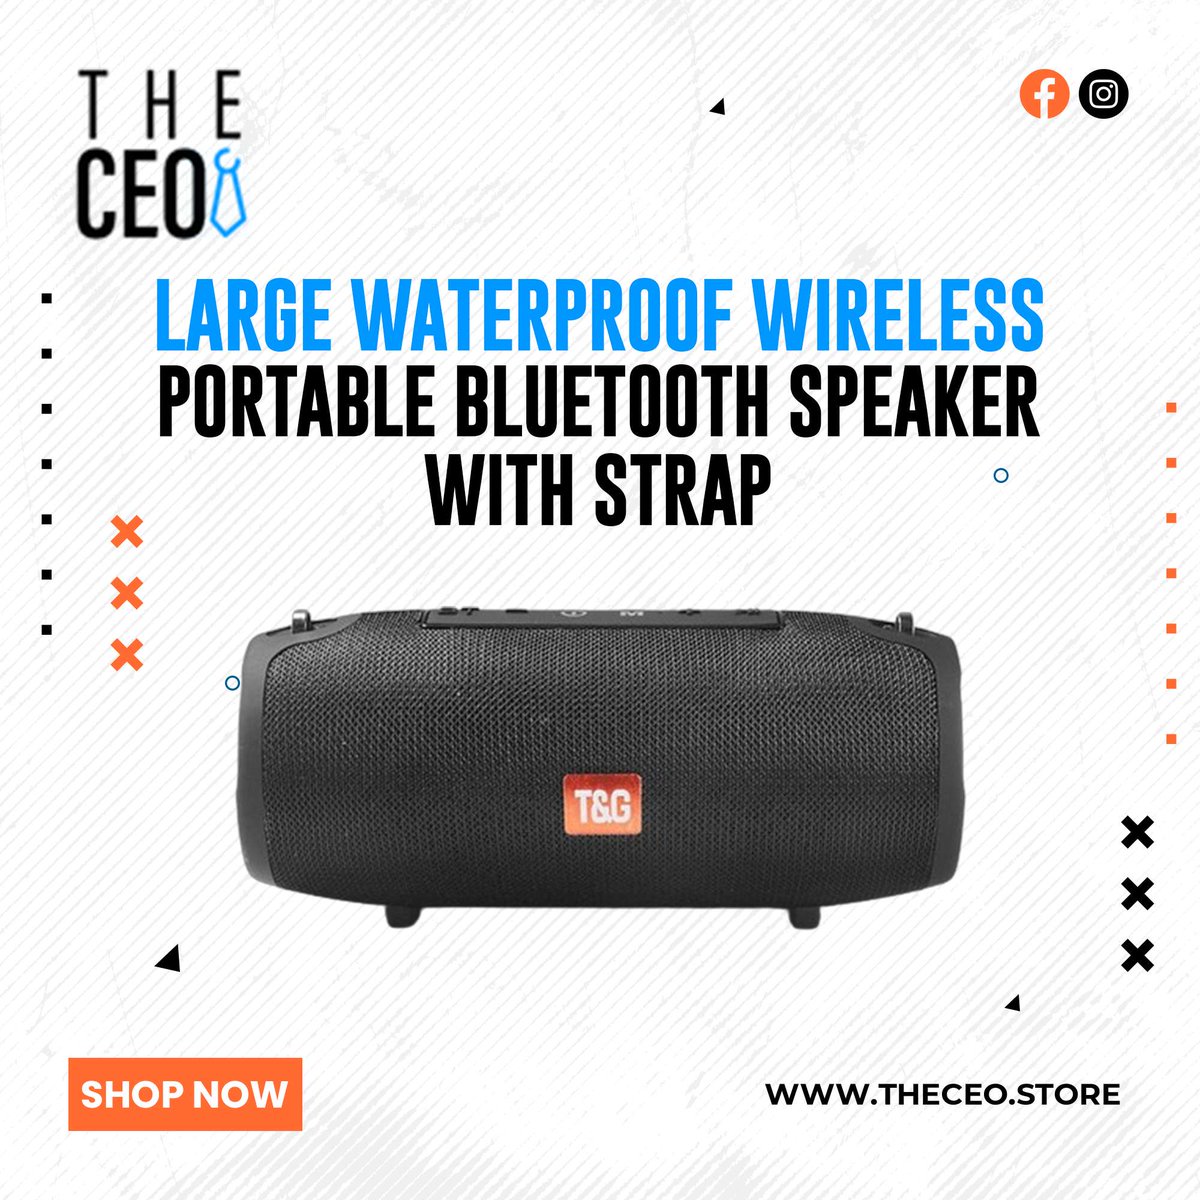 Experience music without limits with our Large Waterproof Wireless Portable Bluetooth Speaker With Strap. Your ultimate companion for adventure-ready sound. 🎶🔊

Ｓｈｏｐ ｎｏｗ ➟ surl.li/svtke

#SoundAnywhere #Speaker #BluetoothSpeaker #WaterproofSpeaker #TheCEOStore